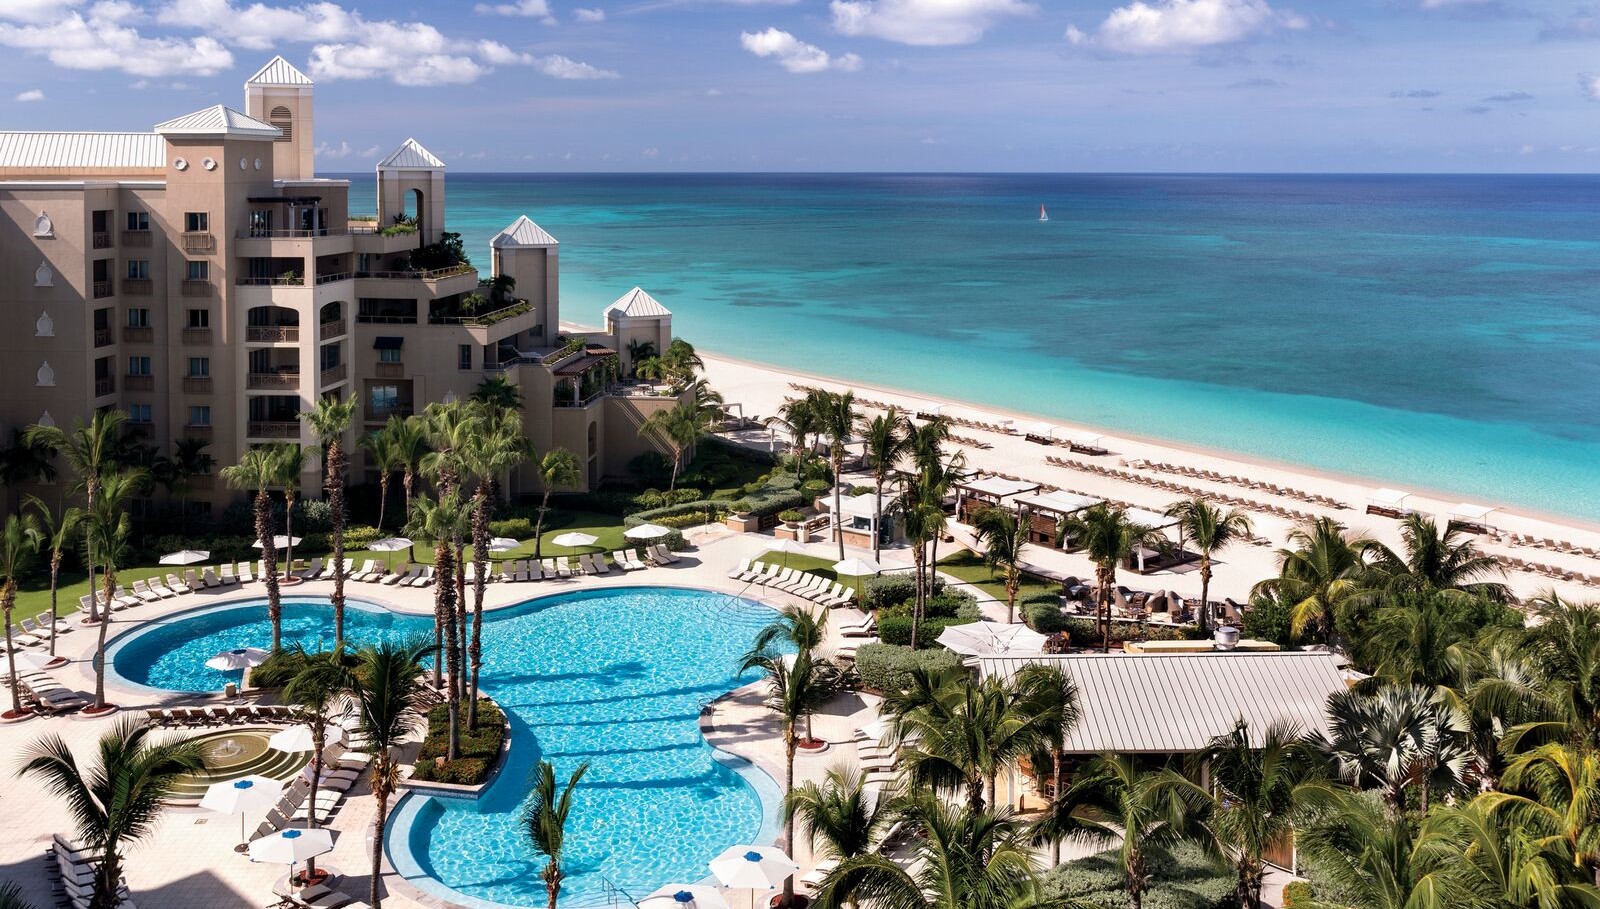 Aerial view of The Ritz-Carlton, Grand Cayman featuring the Caribbean Sea